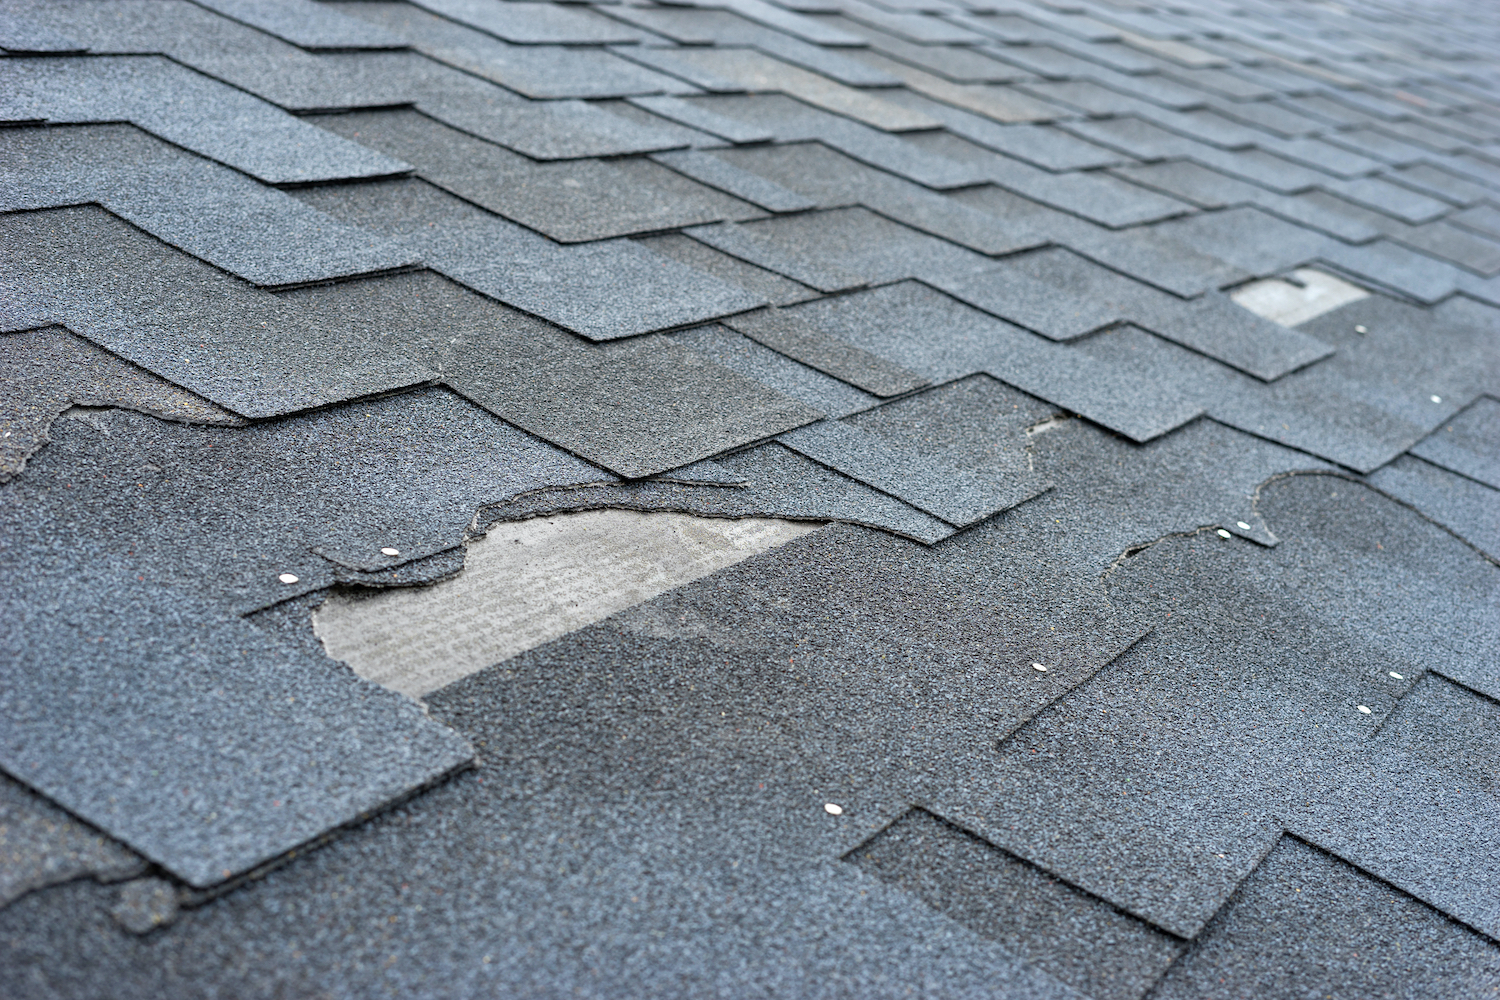 ripped off shingles from storm roof damage